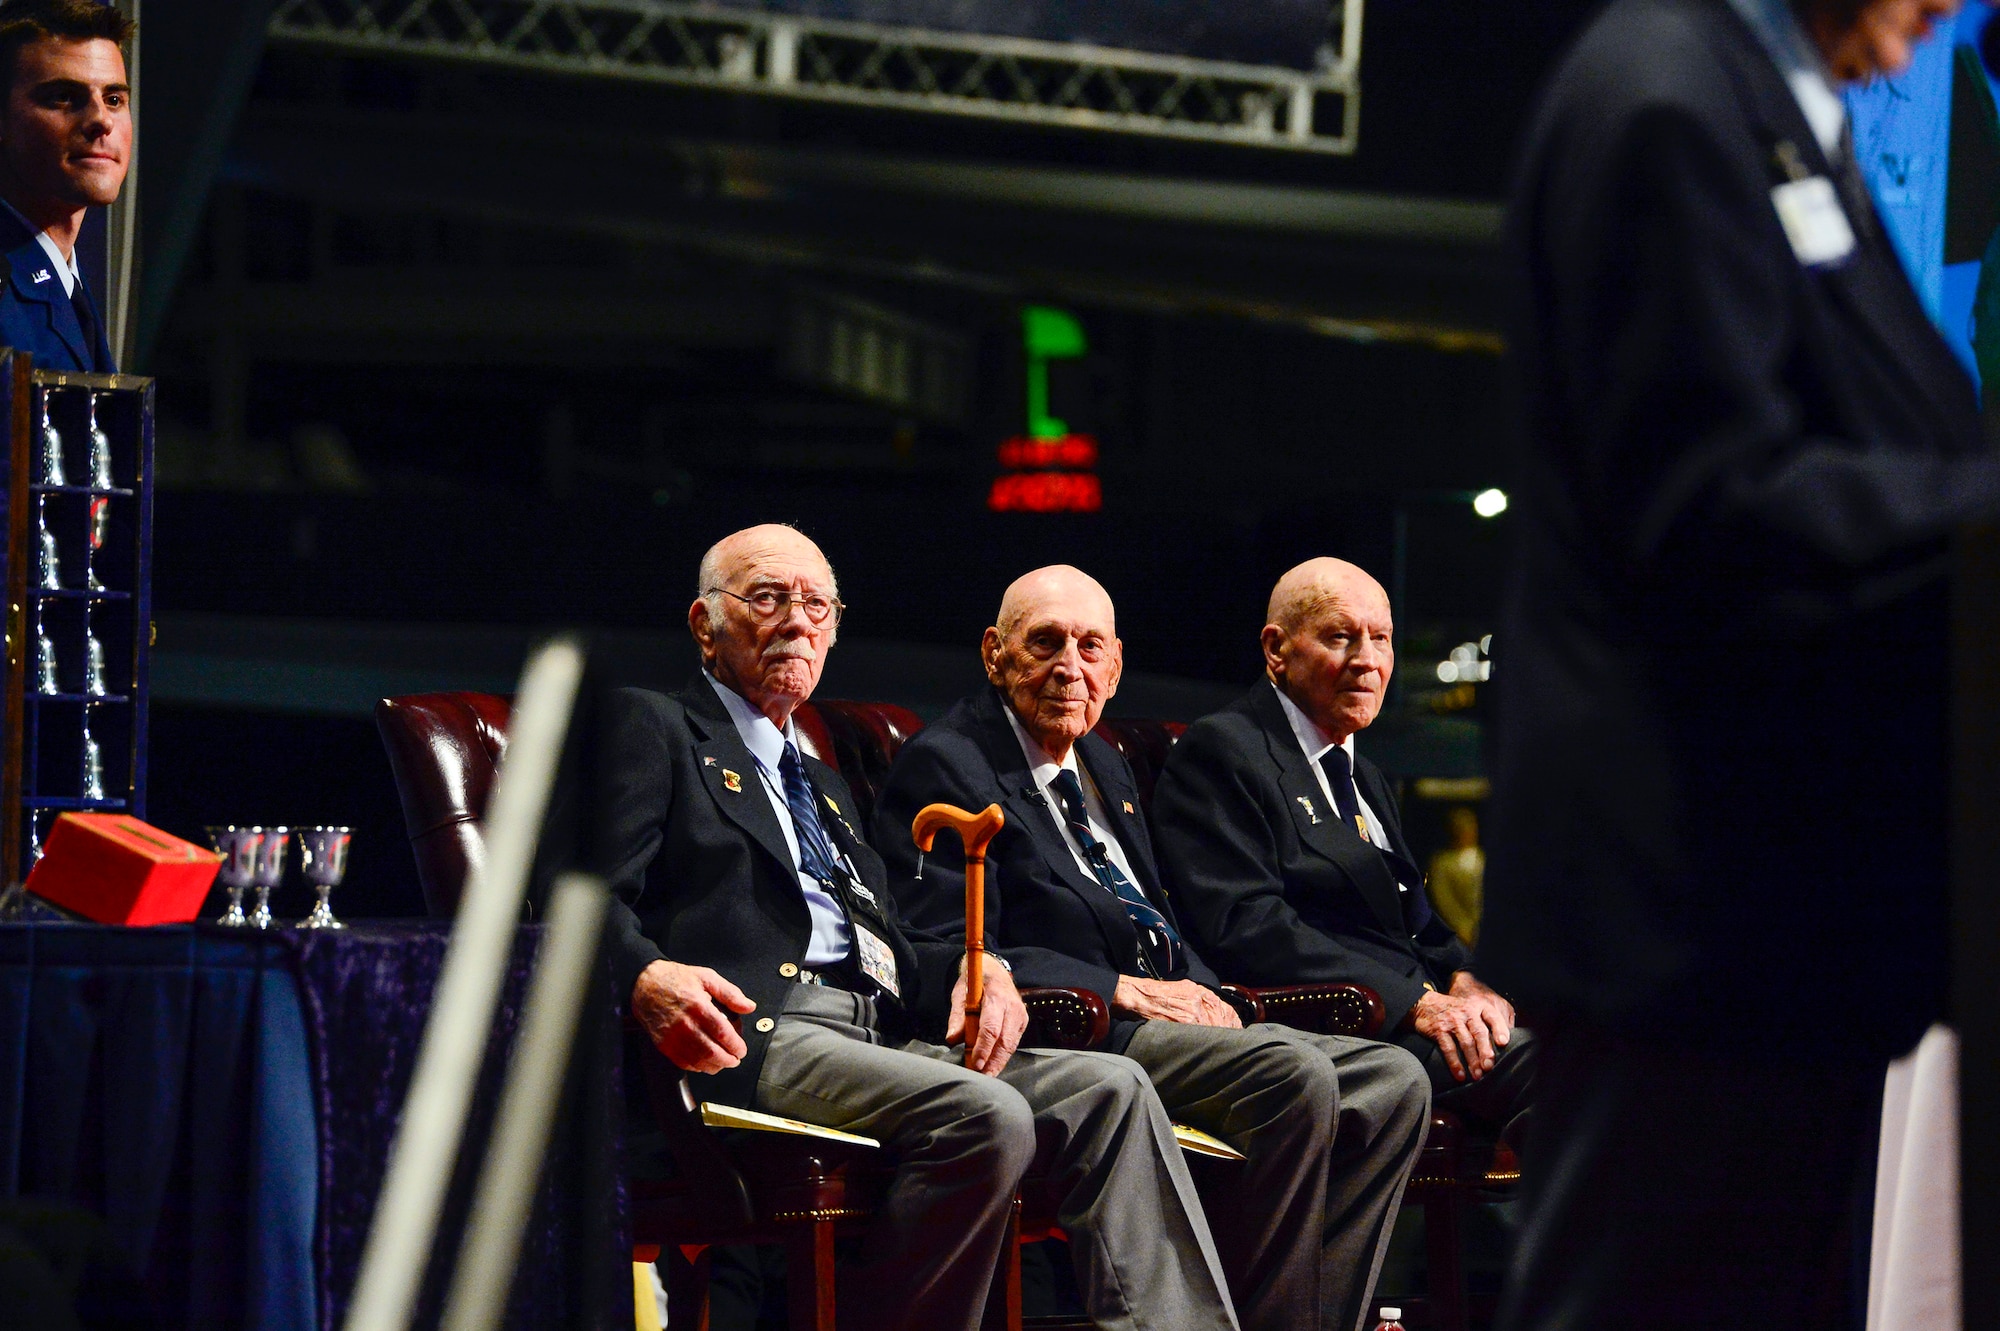 Retired Col. Carroll "C.V" Glines took the podium before The Doolittle Tokyo Raiders shared their last and final toast at the National Museum of the U.S. Air Force Nov. 09, 2013 in Dayton, Ohio. Glines is the historian for the Doolittle Raiders and a distinguished author.